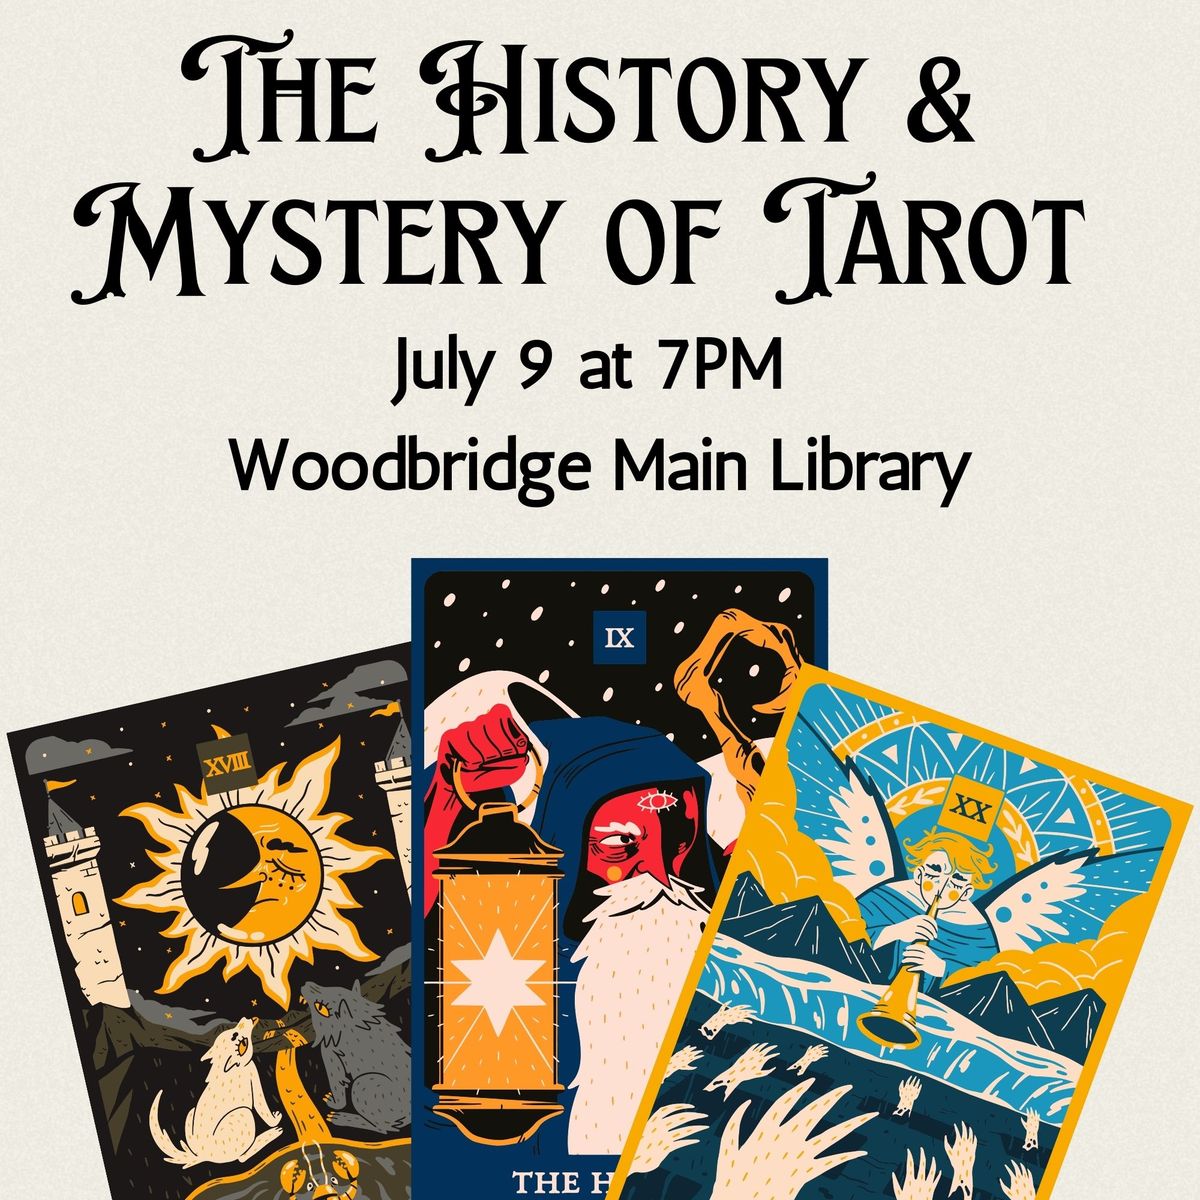 The History and Mystery of Tarot